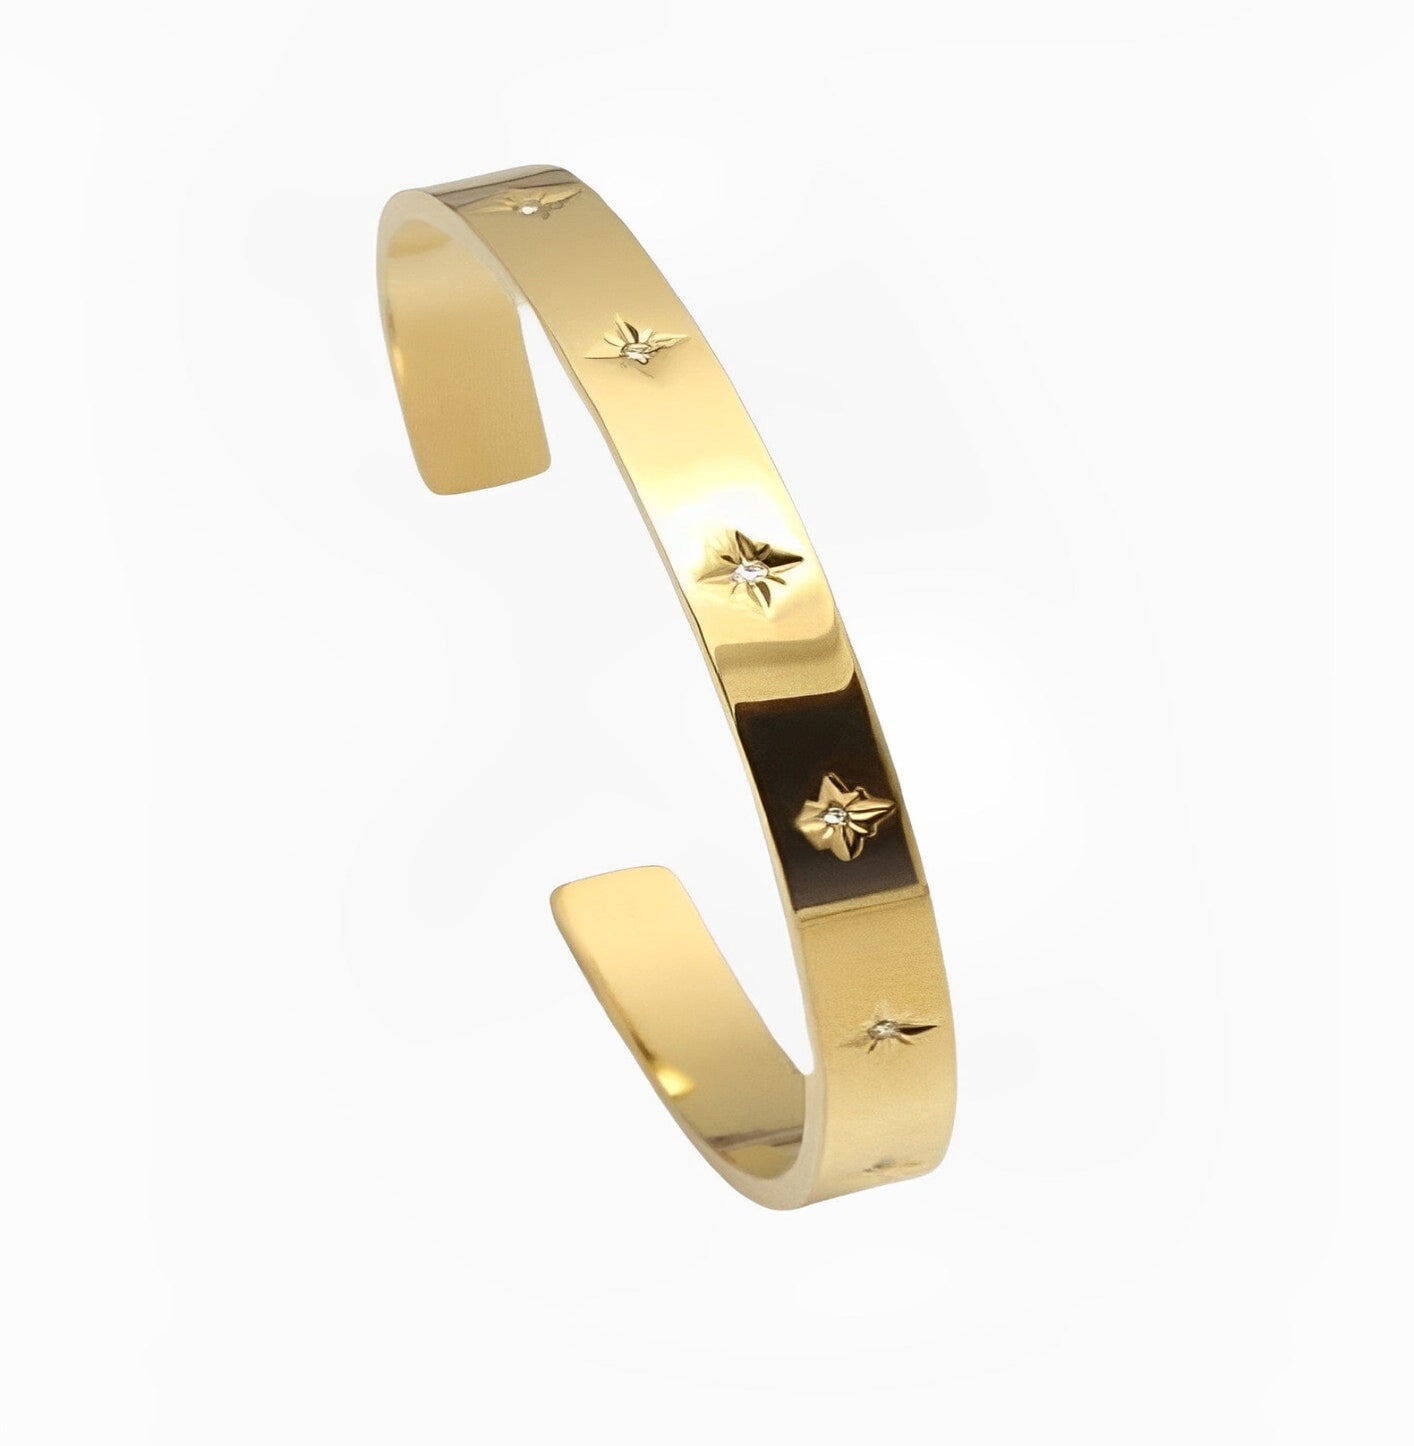 STAR BRACELET braclet Yubama Jewelry Online Store - The Elegant Designs of Gold and Silver ! 